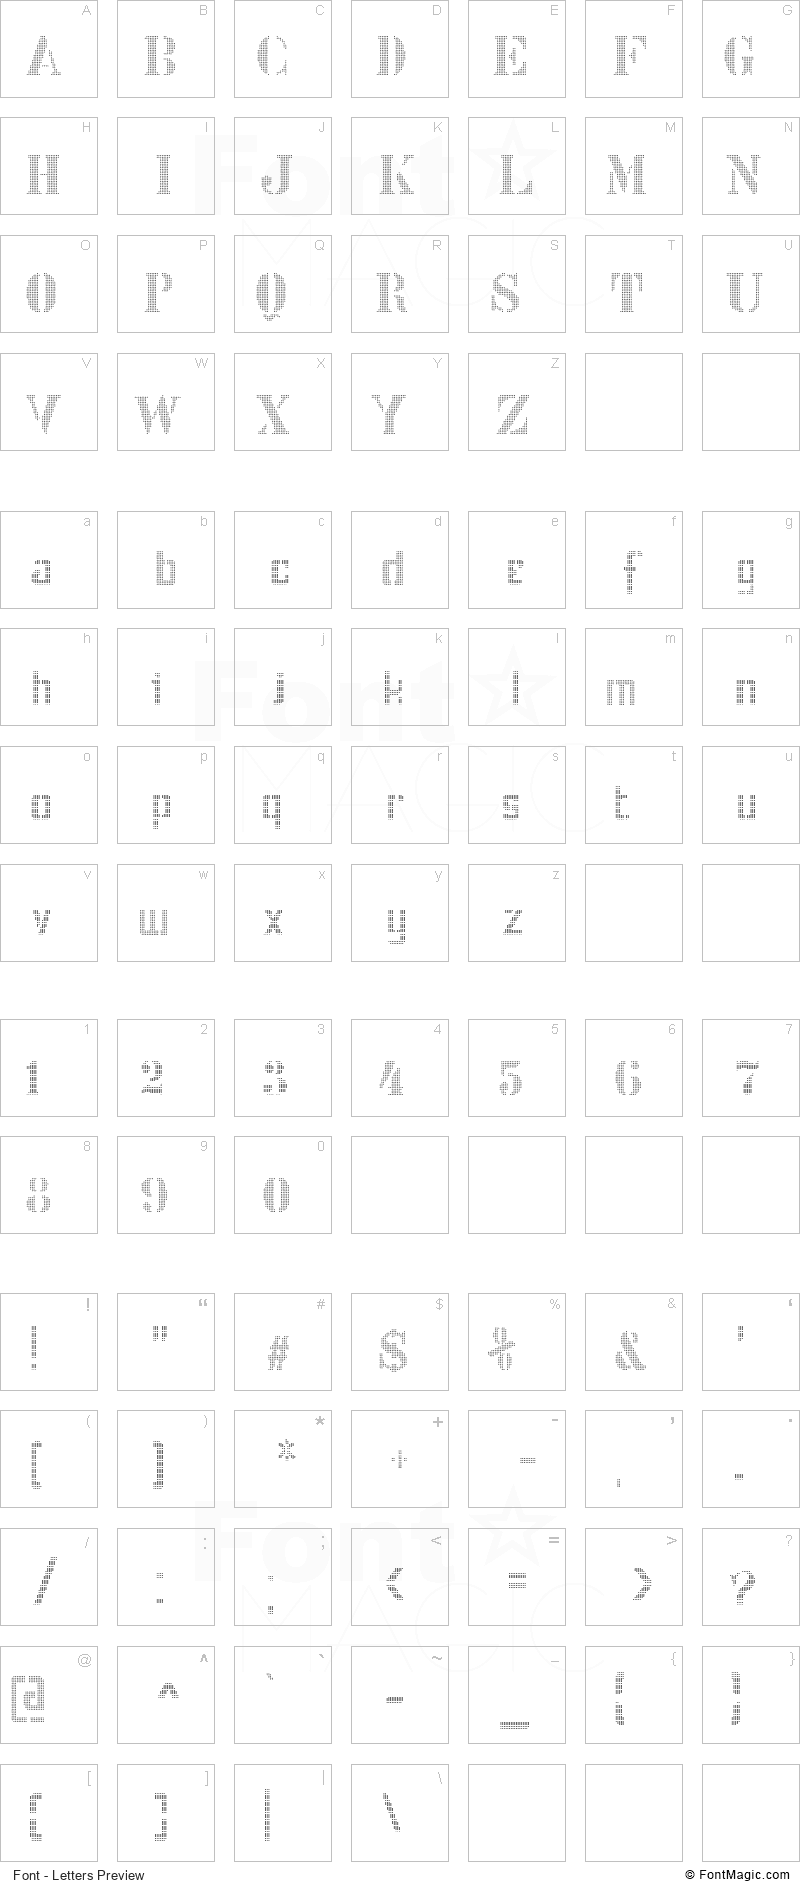 Stencix Font - All Latters Preview Chart